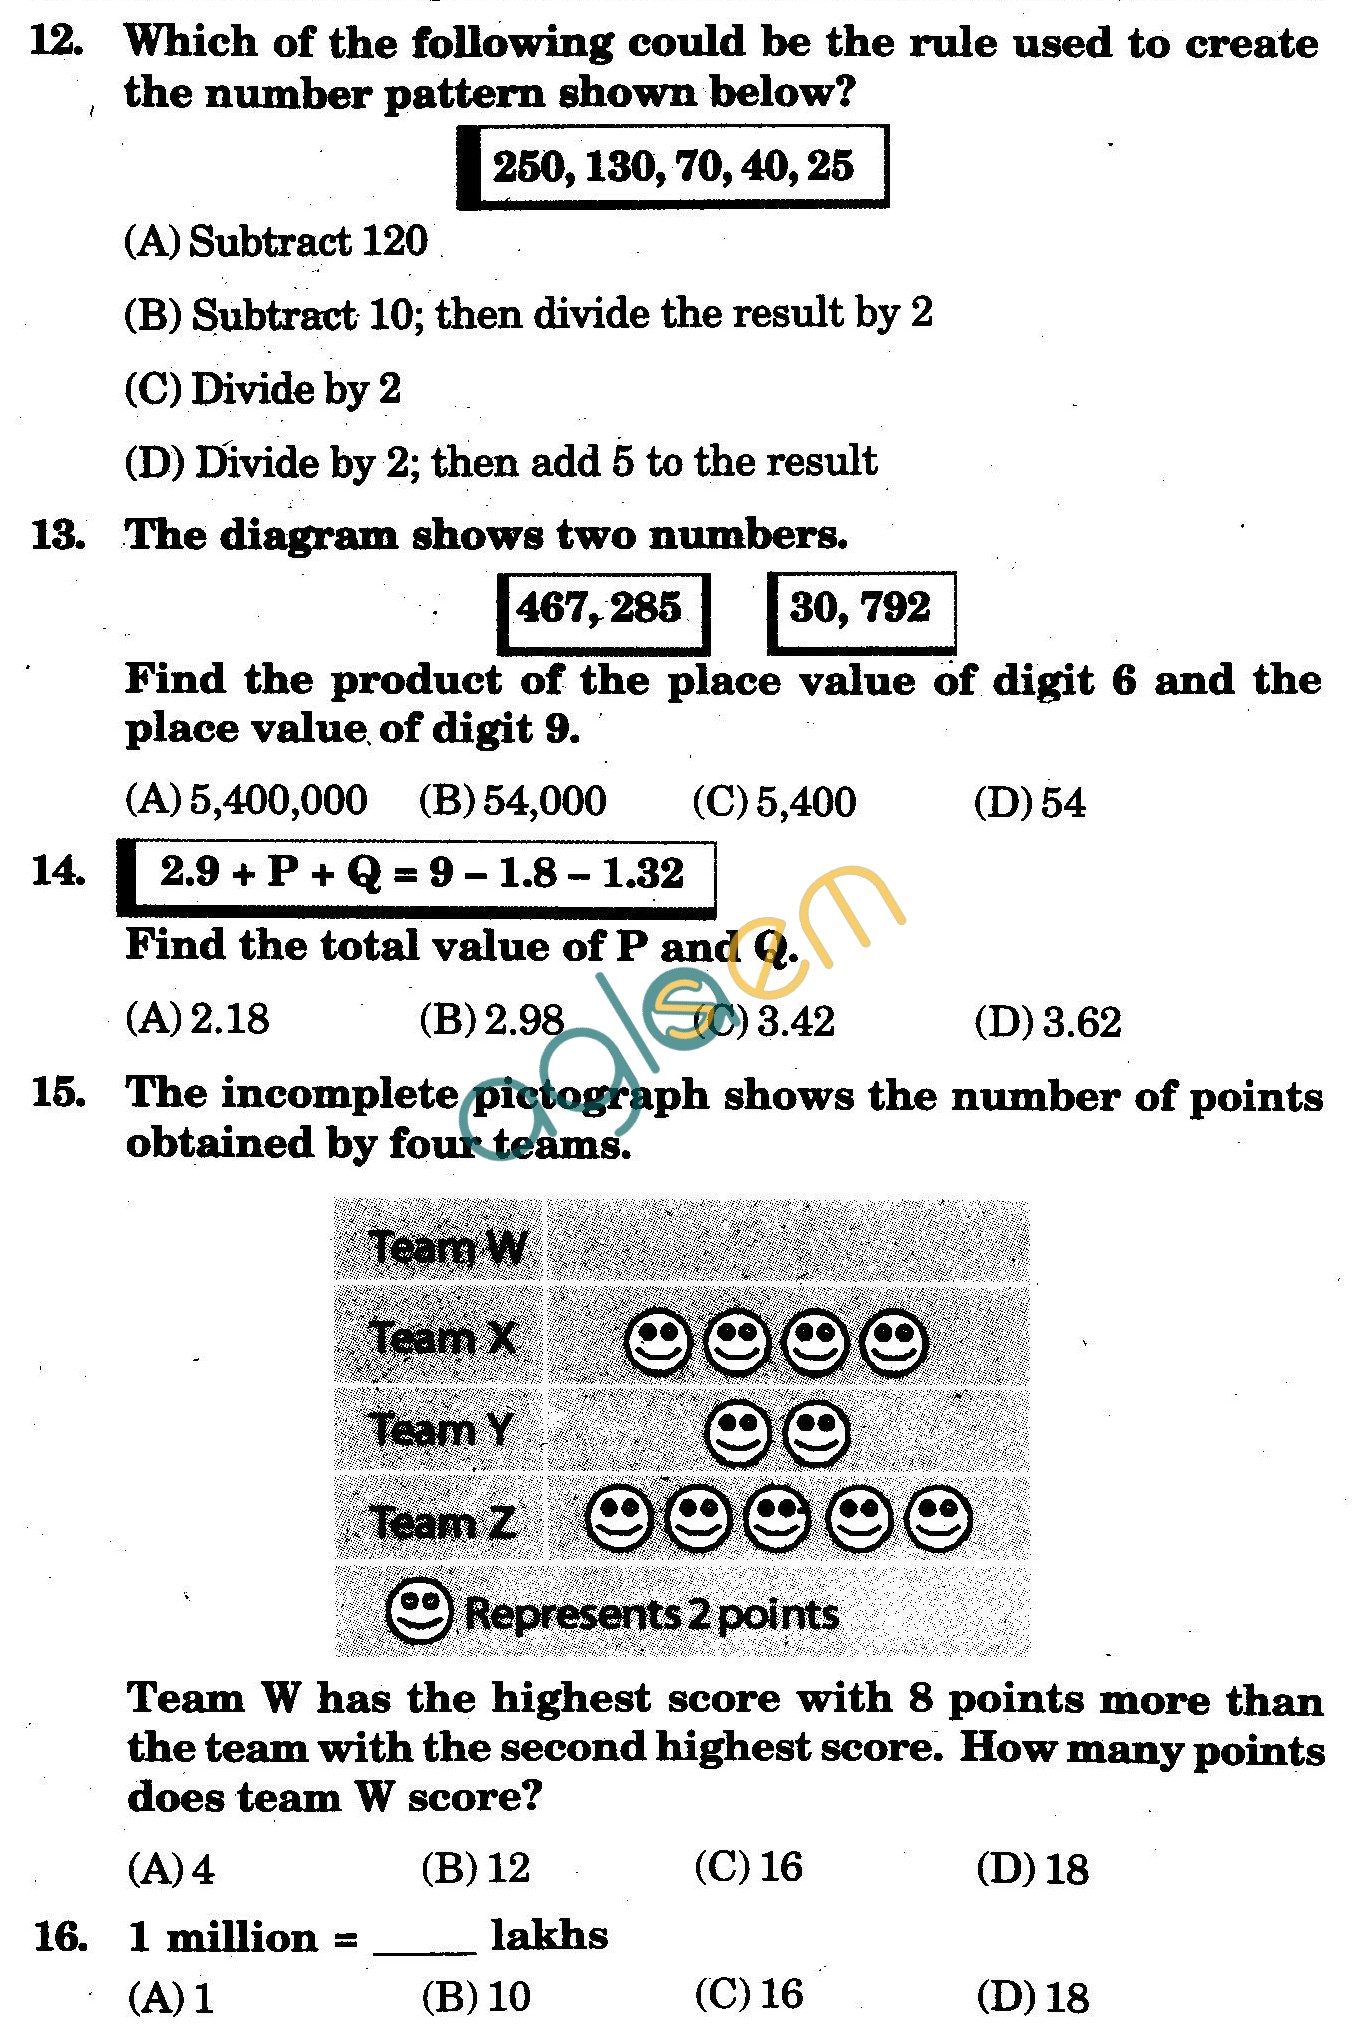 NSTSE 2009 Class VI Question Paper with Answers - Mathematics